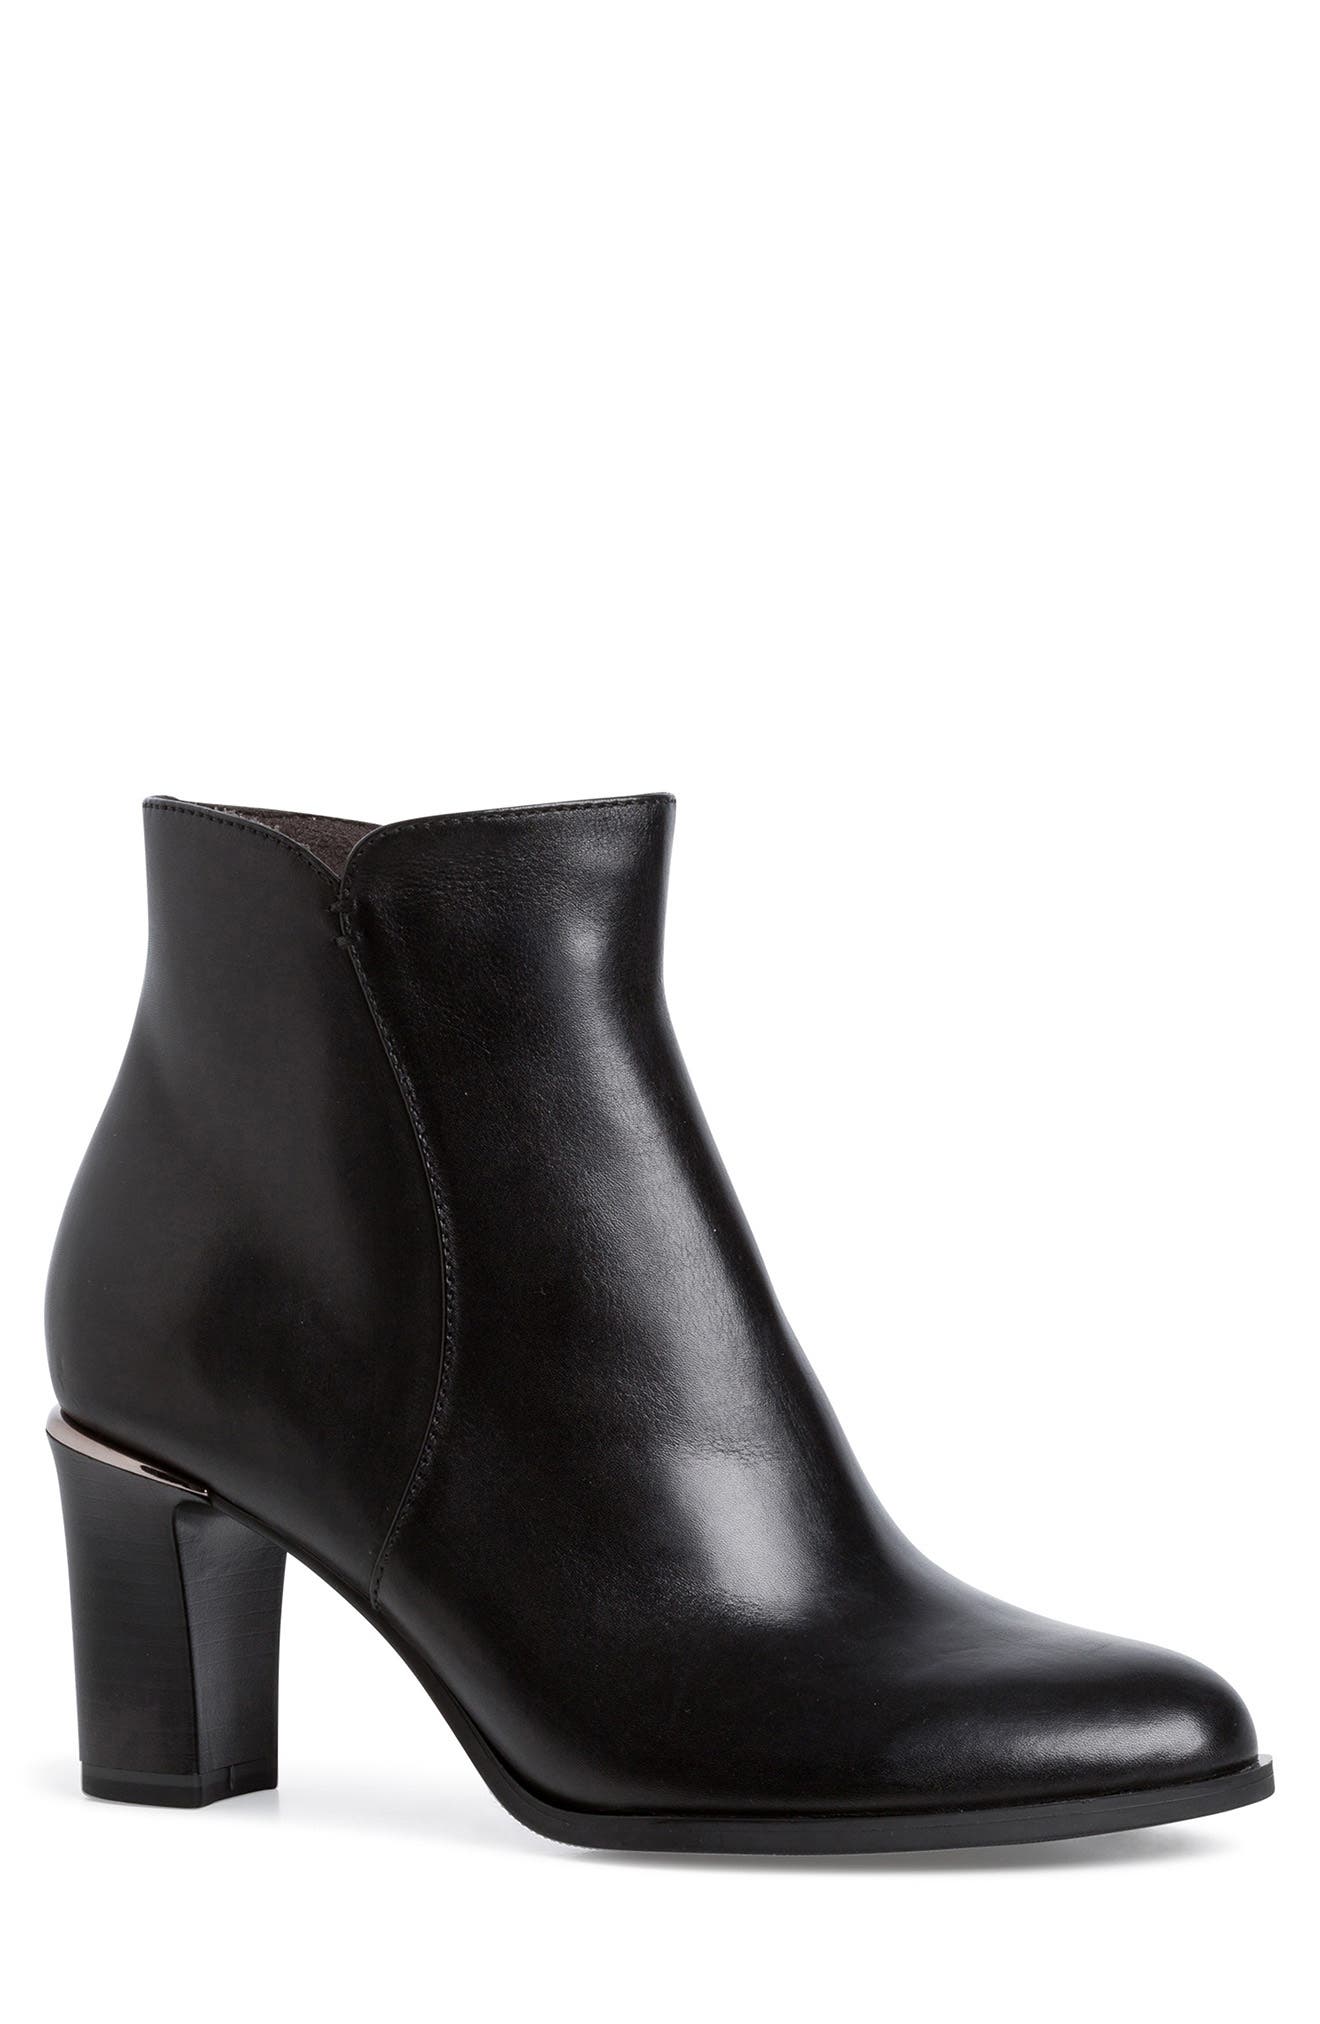 Best Selling Tamaris Yvette Ankle Bootie, Size 39 in at Nordstrom | AccuWeather Shop